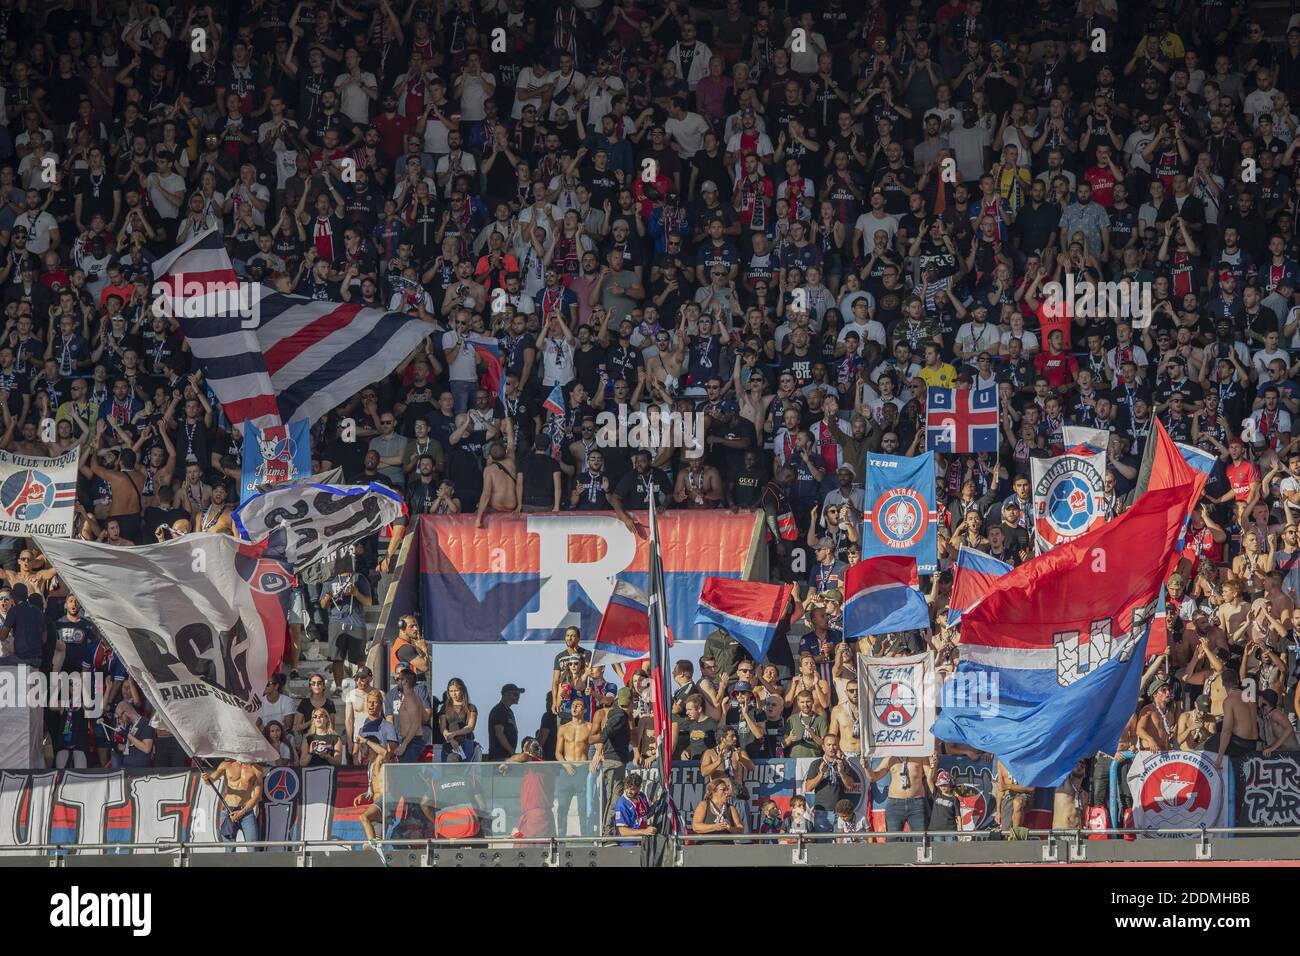 in action during the Ligue 1 Conforama Paris Saint-Germain v RC Strasbourg  football match at the Parc des Princes Stadium on September 14, 2019 in  Paris, France. PSG won 1-0. Photo by